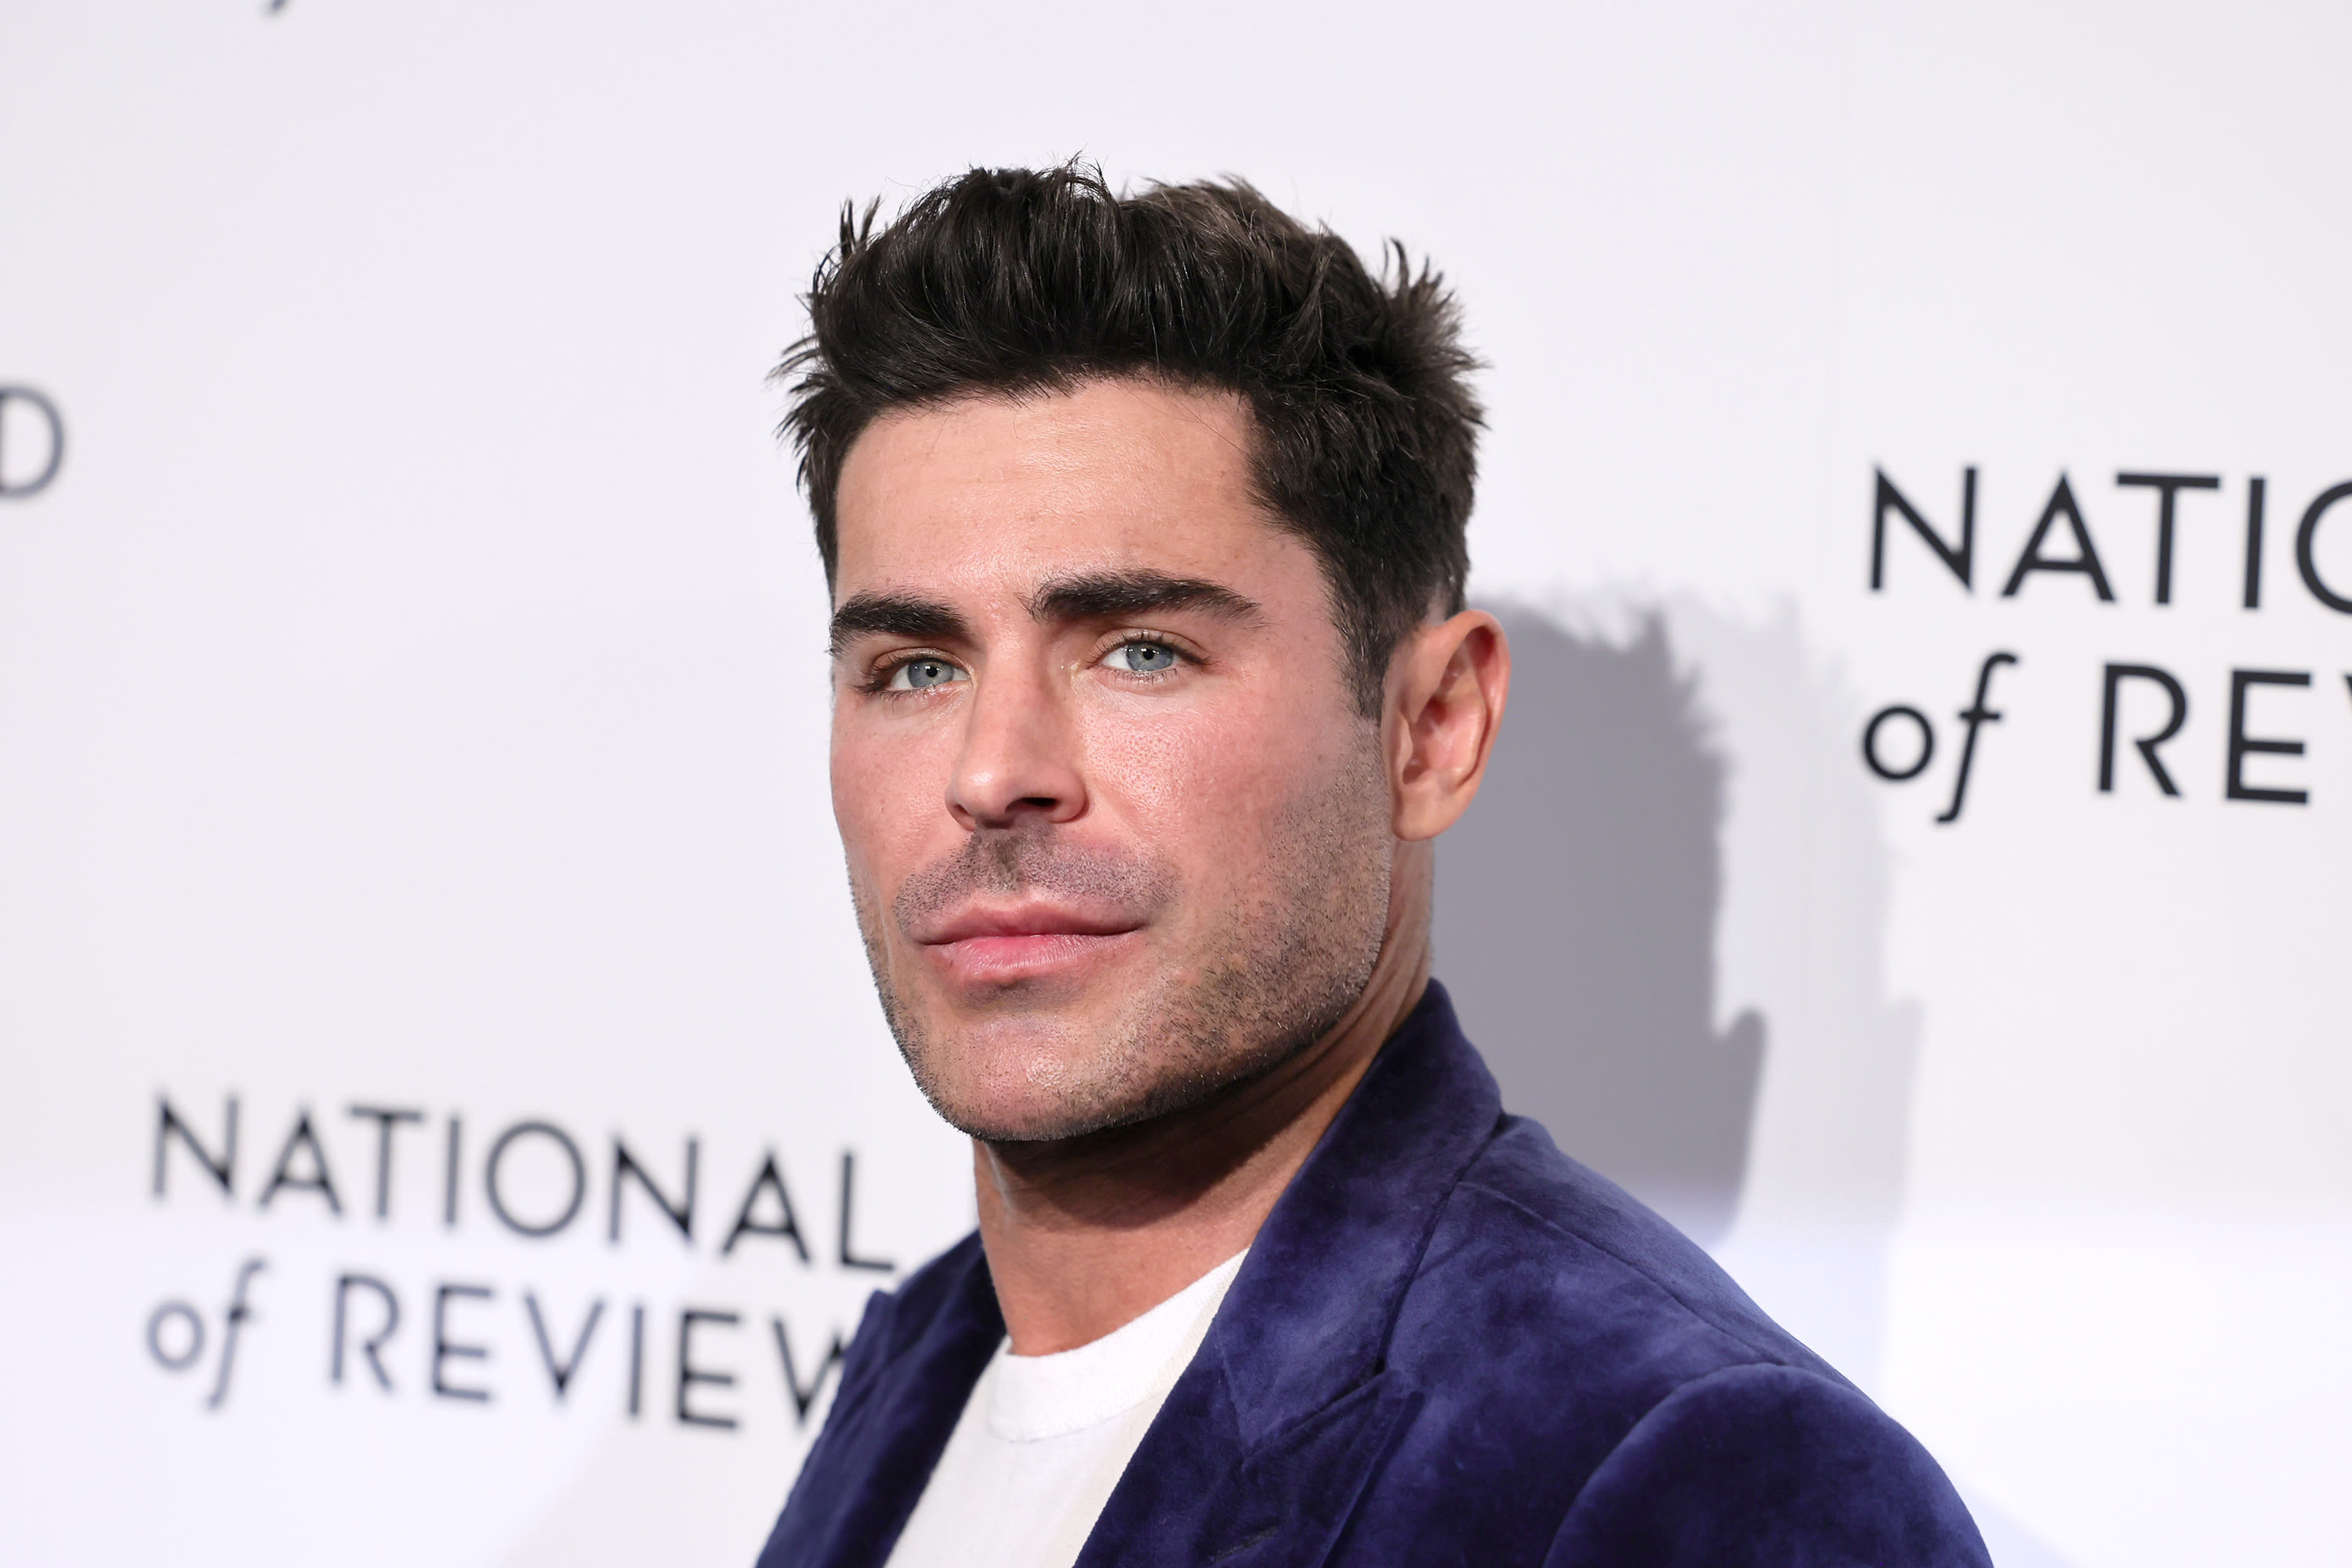 Zac Efron hospitalized after swimming incident in Ibiza pool